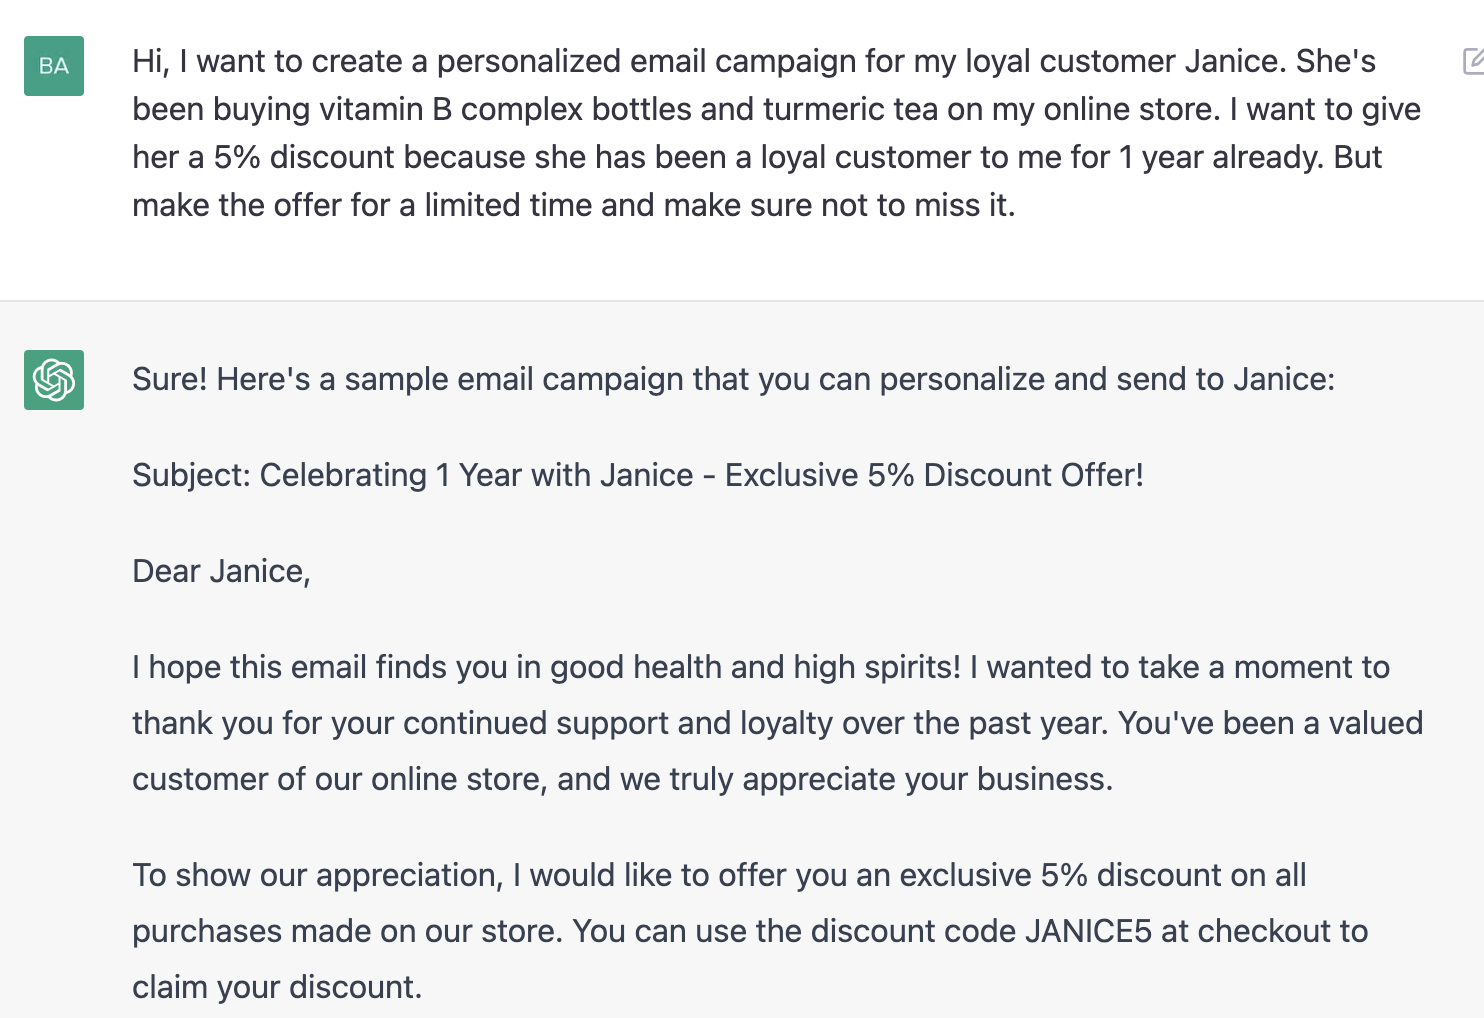 ChatGPT prompt about creating a personalized email campaign for loyal customer